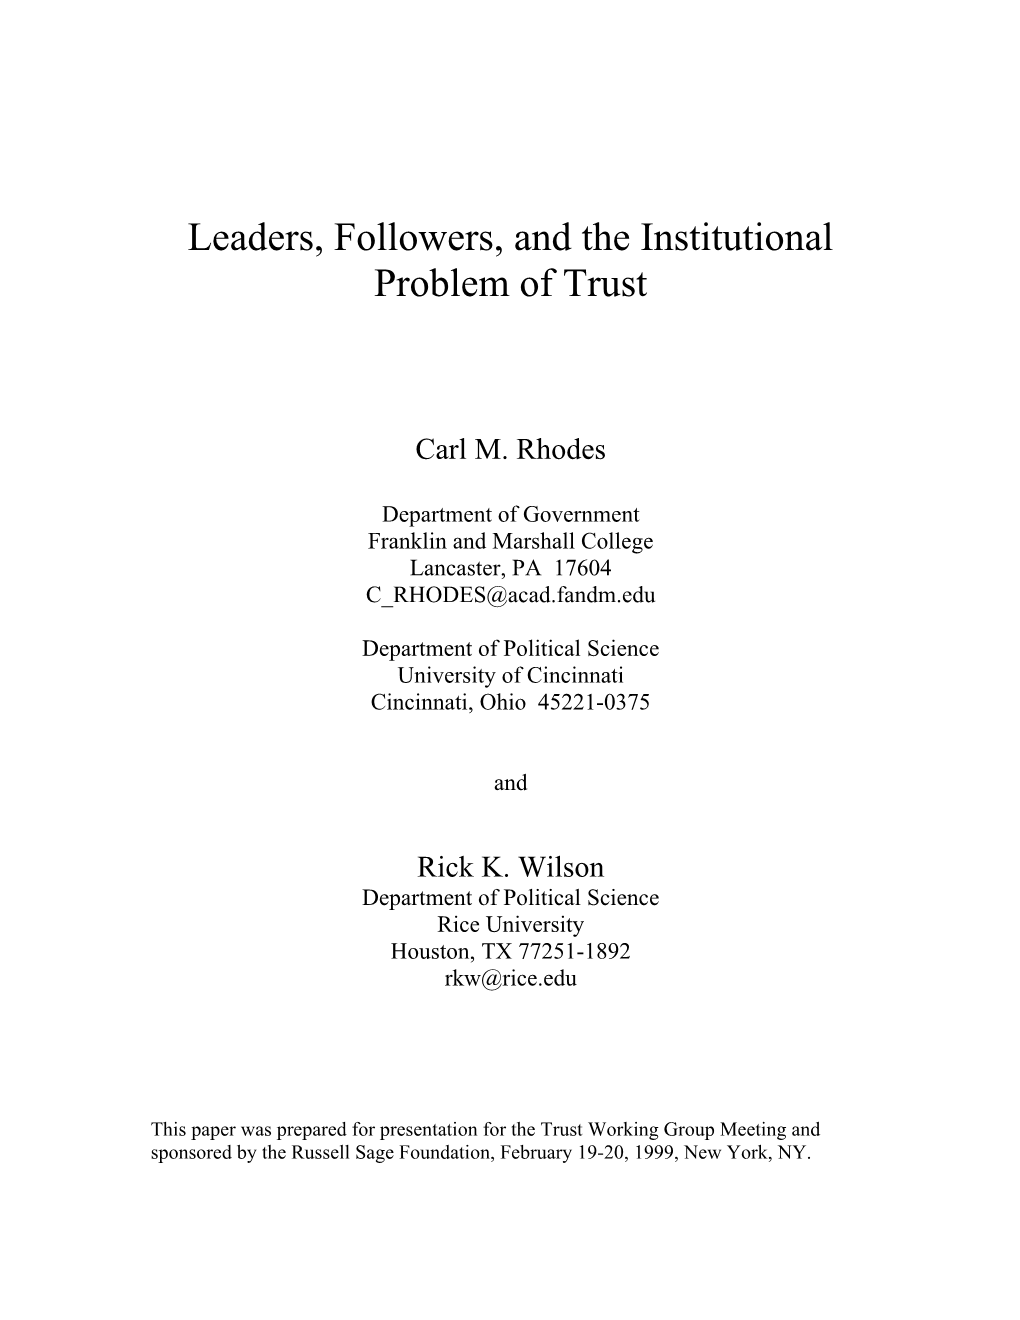 Leaders, Followers, and the Institutional Problem of Trust